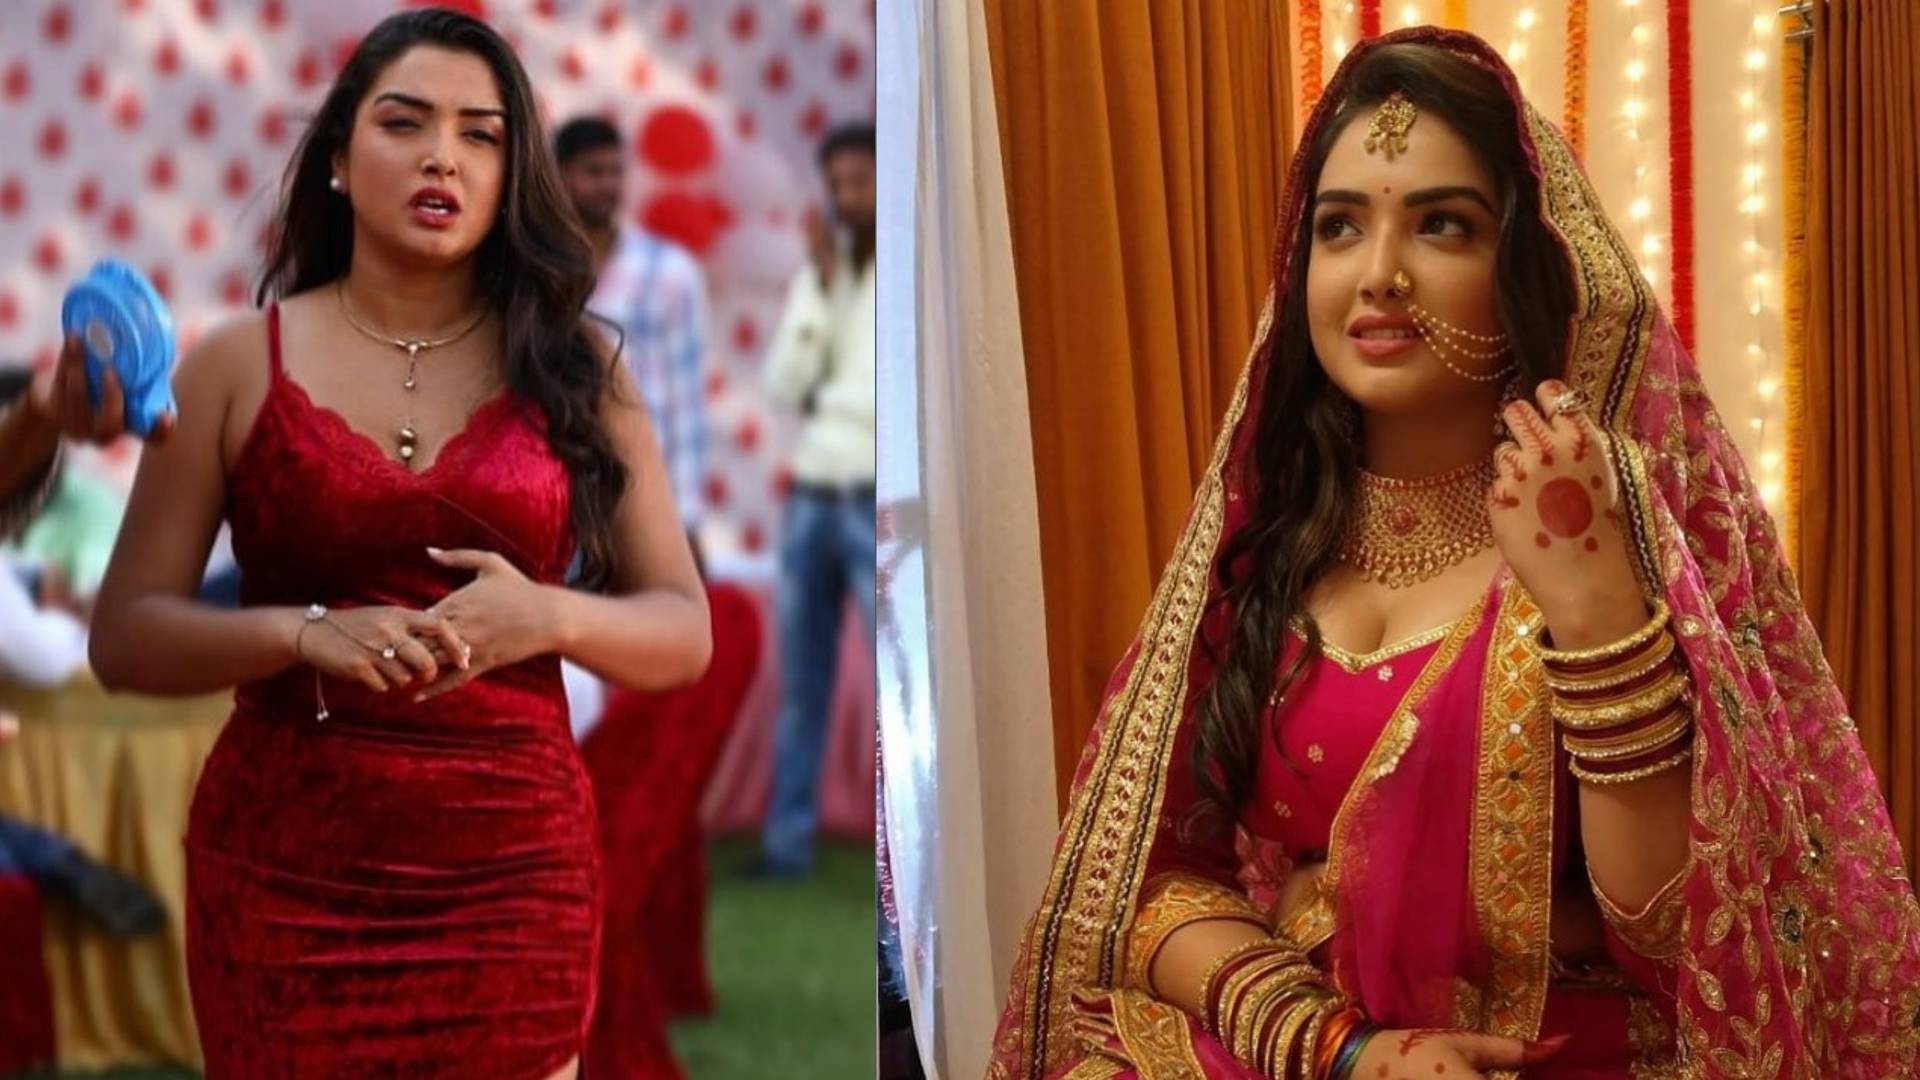 amrapali dubey dinesh lal yadav nirahua love Story bhojpuri actress is not  married at age of 25 know reason | Amrapali Dubey à¤…à¤­à¥€ à¤¤à¤• à¤¹à¥ˆà¤‚ à¤¸à¤¿à¤‚à¤—à¤², à¤•à¥à¤¯à¤¾ à¤‡à¤¸  à¤­à¥‹à¤œà¤ªà¥à¤°à¥€ à¤¸à¥à¤ªà¤°à¤¸à¥à¤Ÿà¤¾à¤° à¤•à¥€ à¤µà¤œà